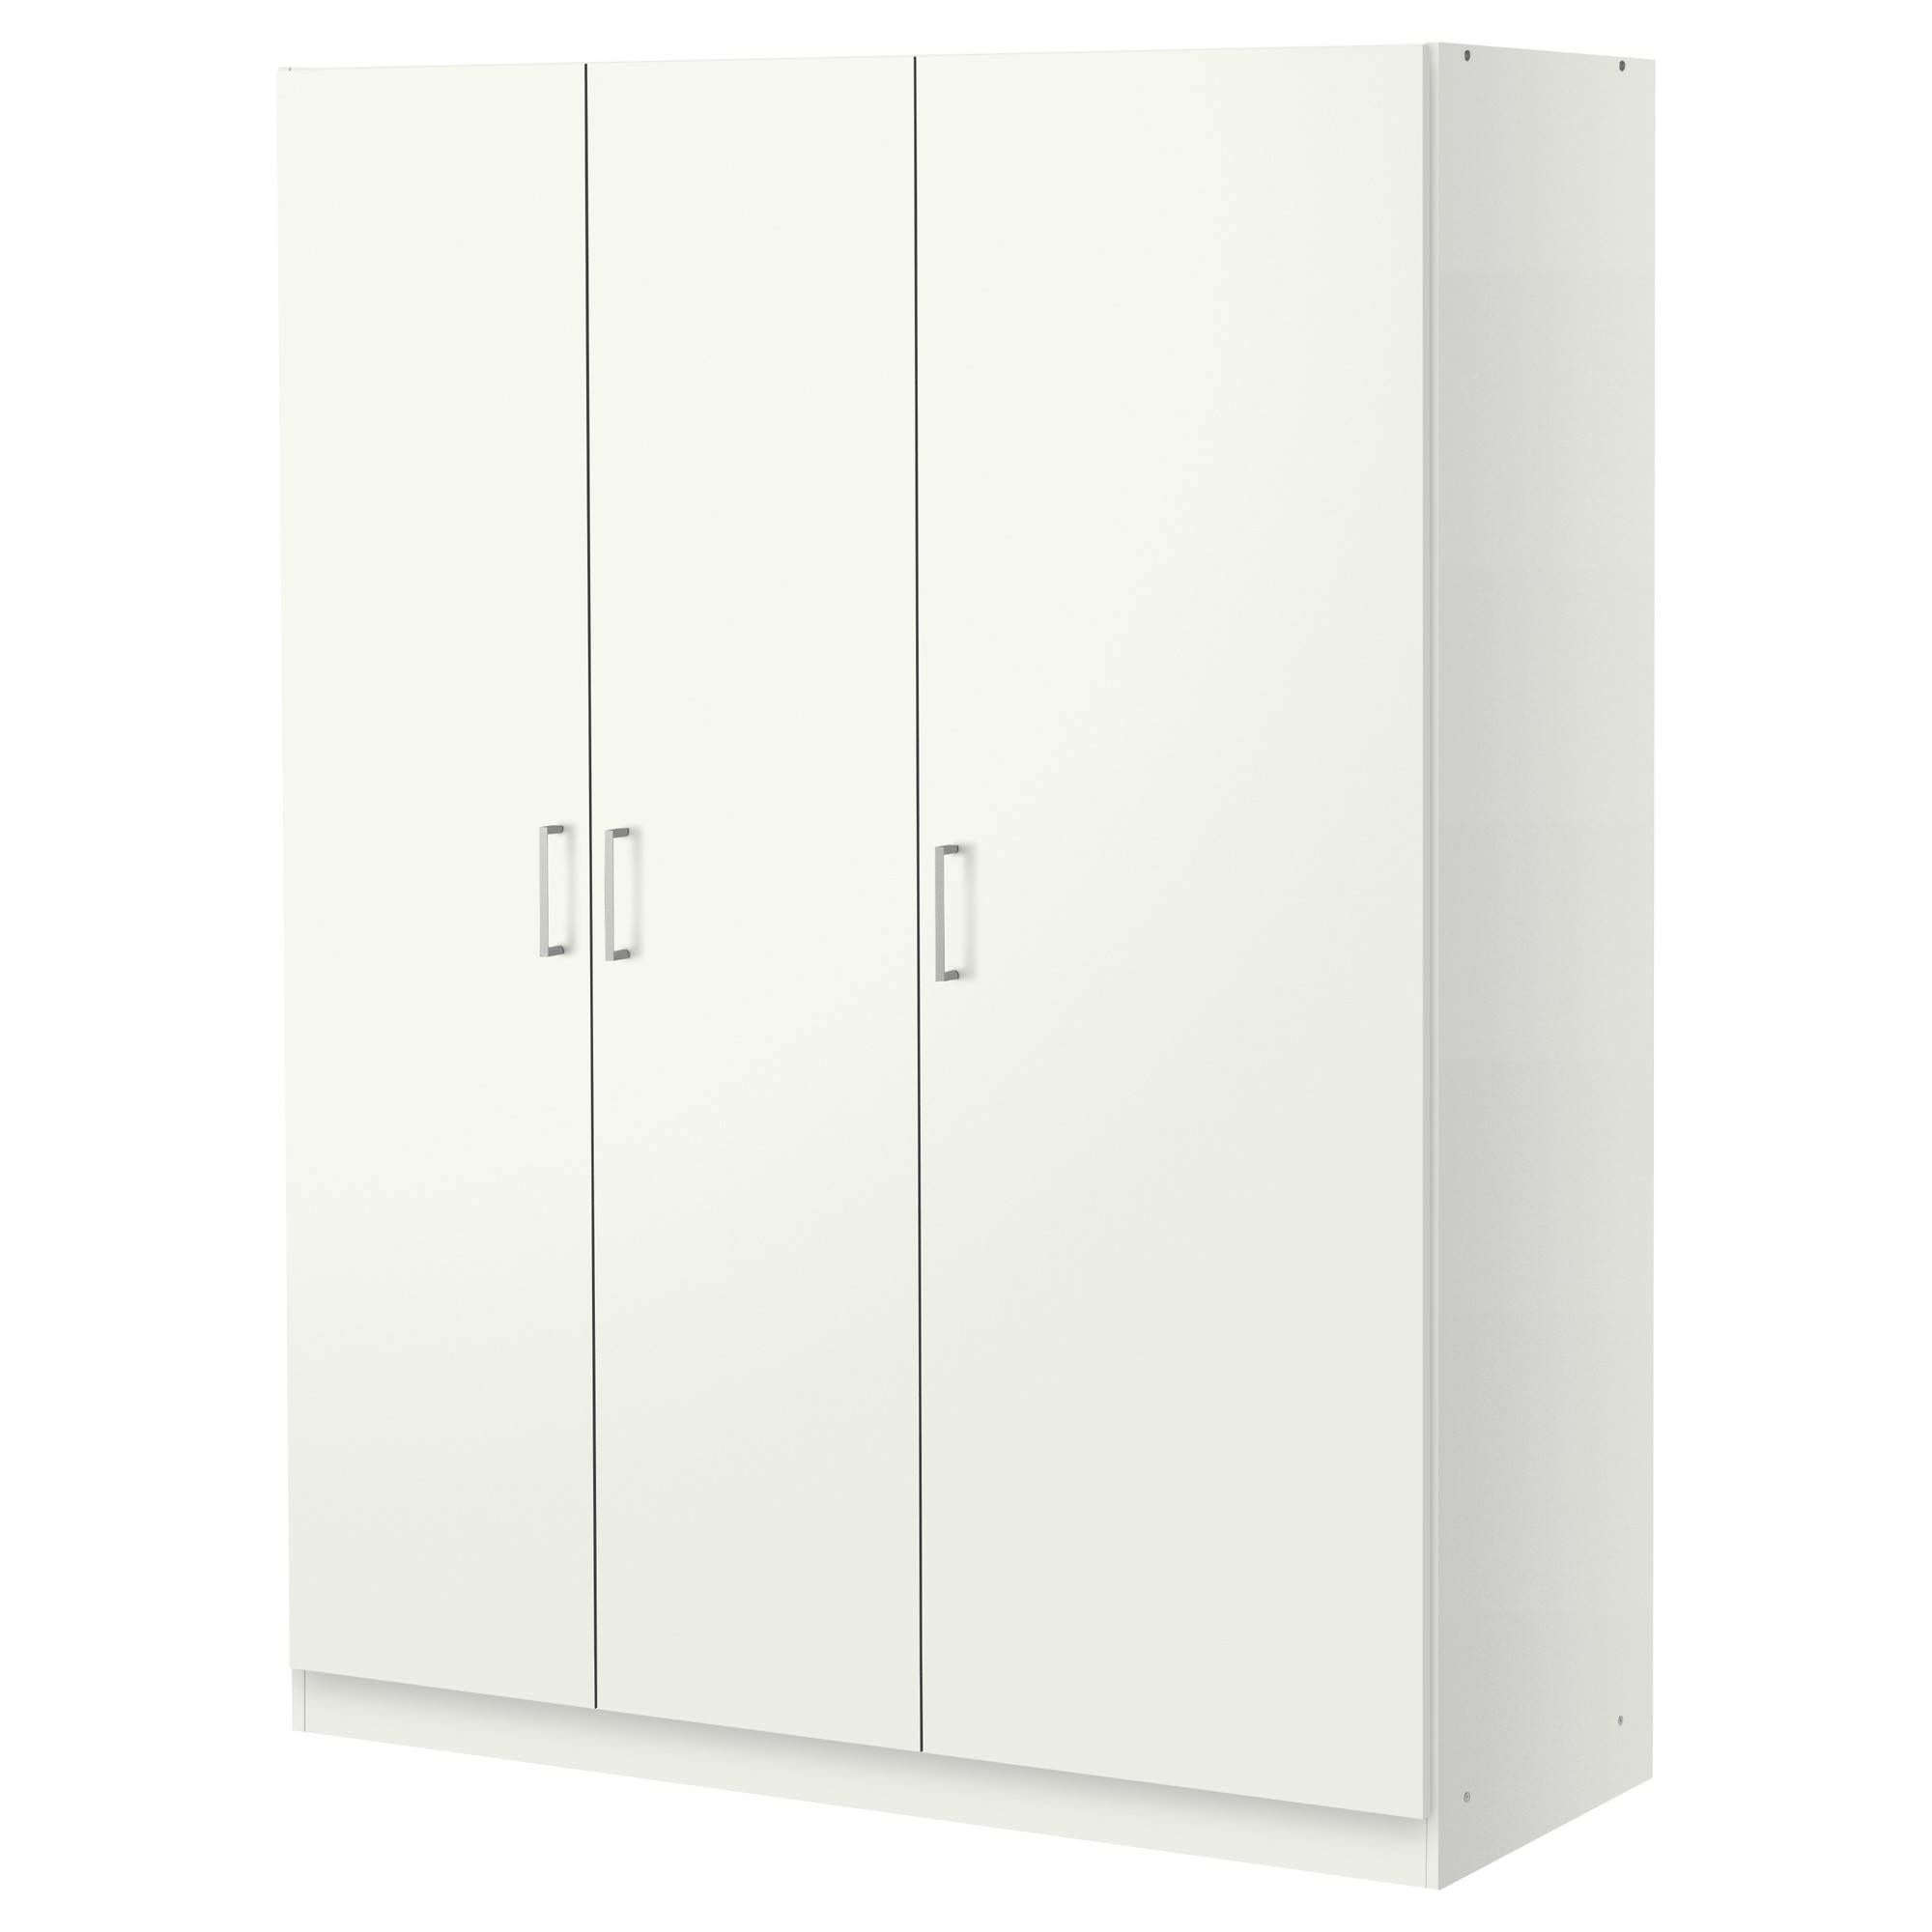 Dombås Wardrobe White 140x181 Cm – Ikea Intended For Double Rail Wardrobes Ikea (View 3 of 30)